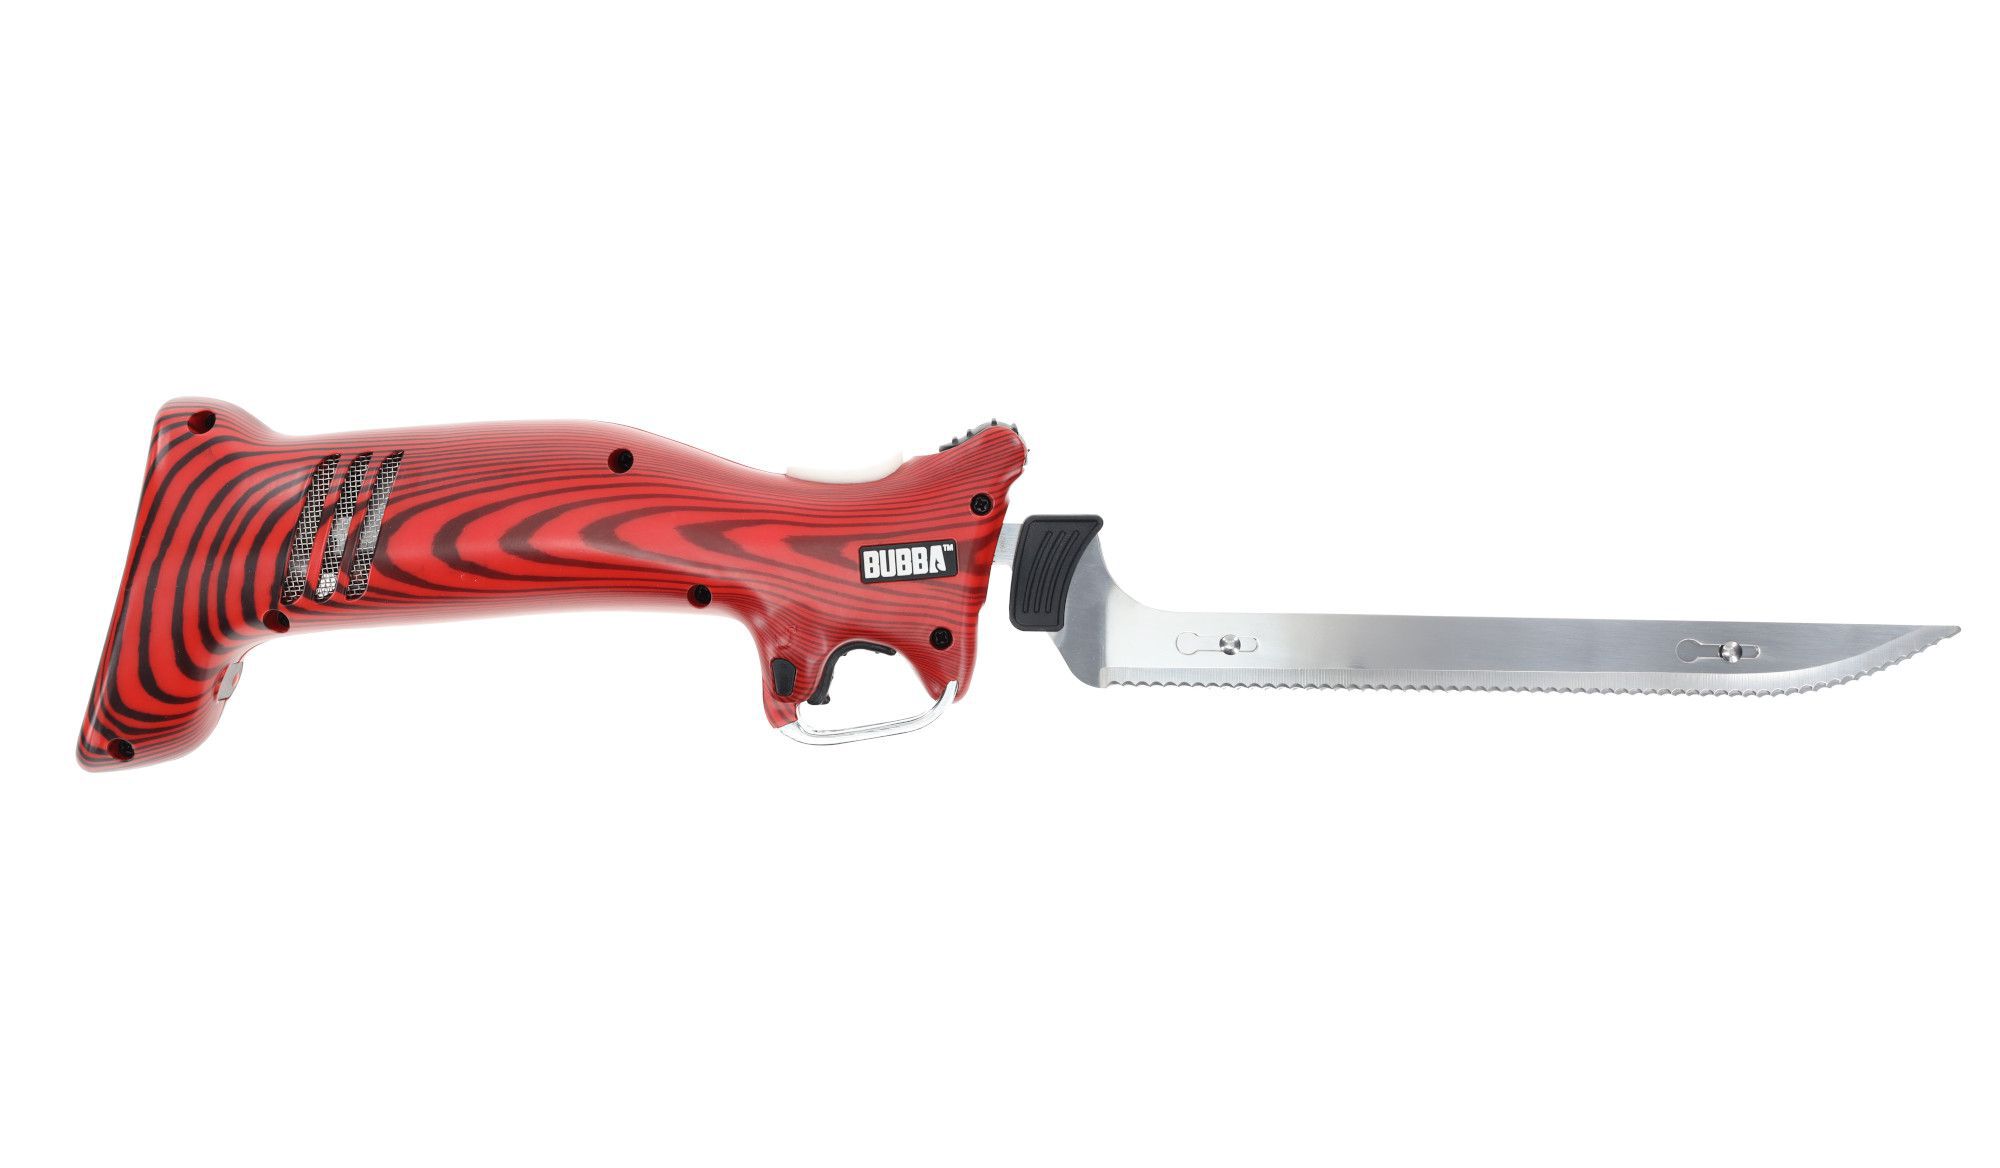 Wholesale cordless electric knife are Useful Kitchen Utensils